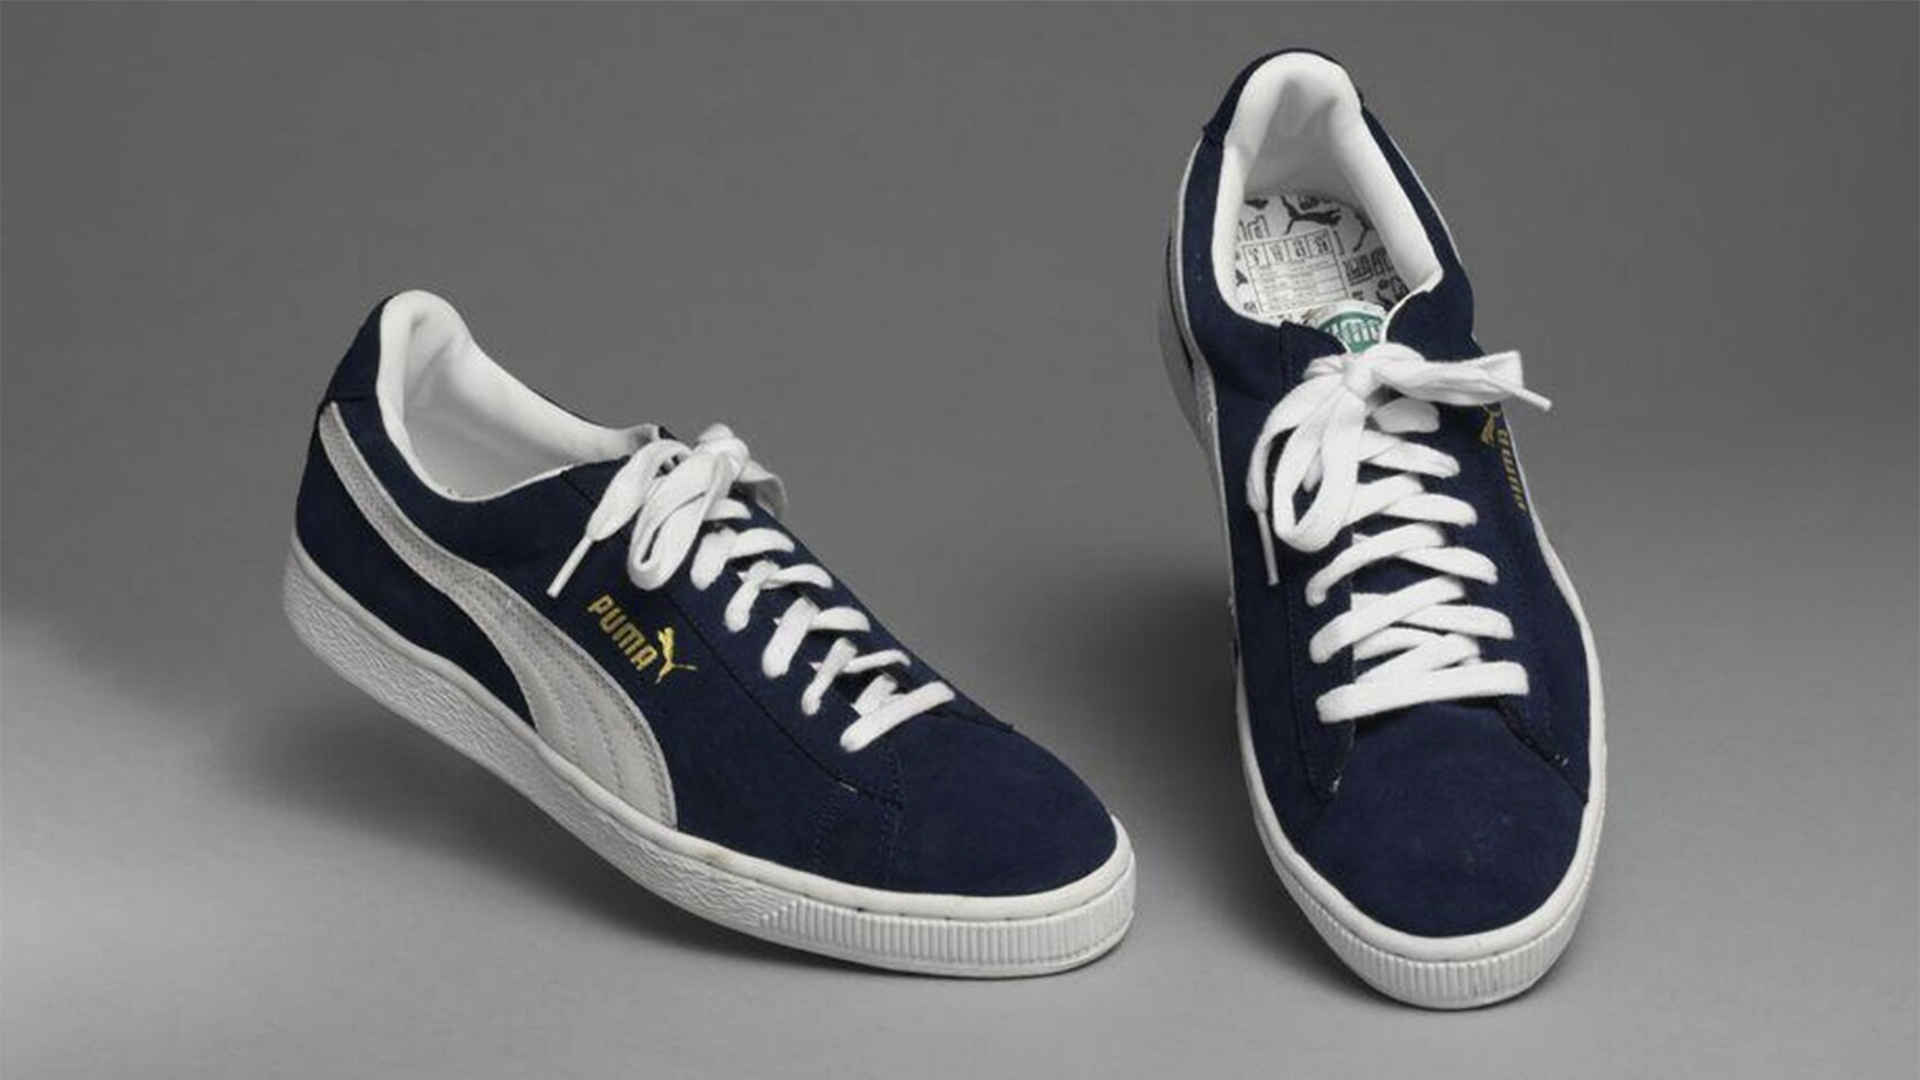 Blue and white Puma trainers